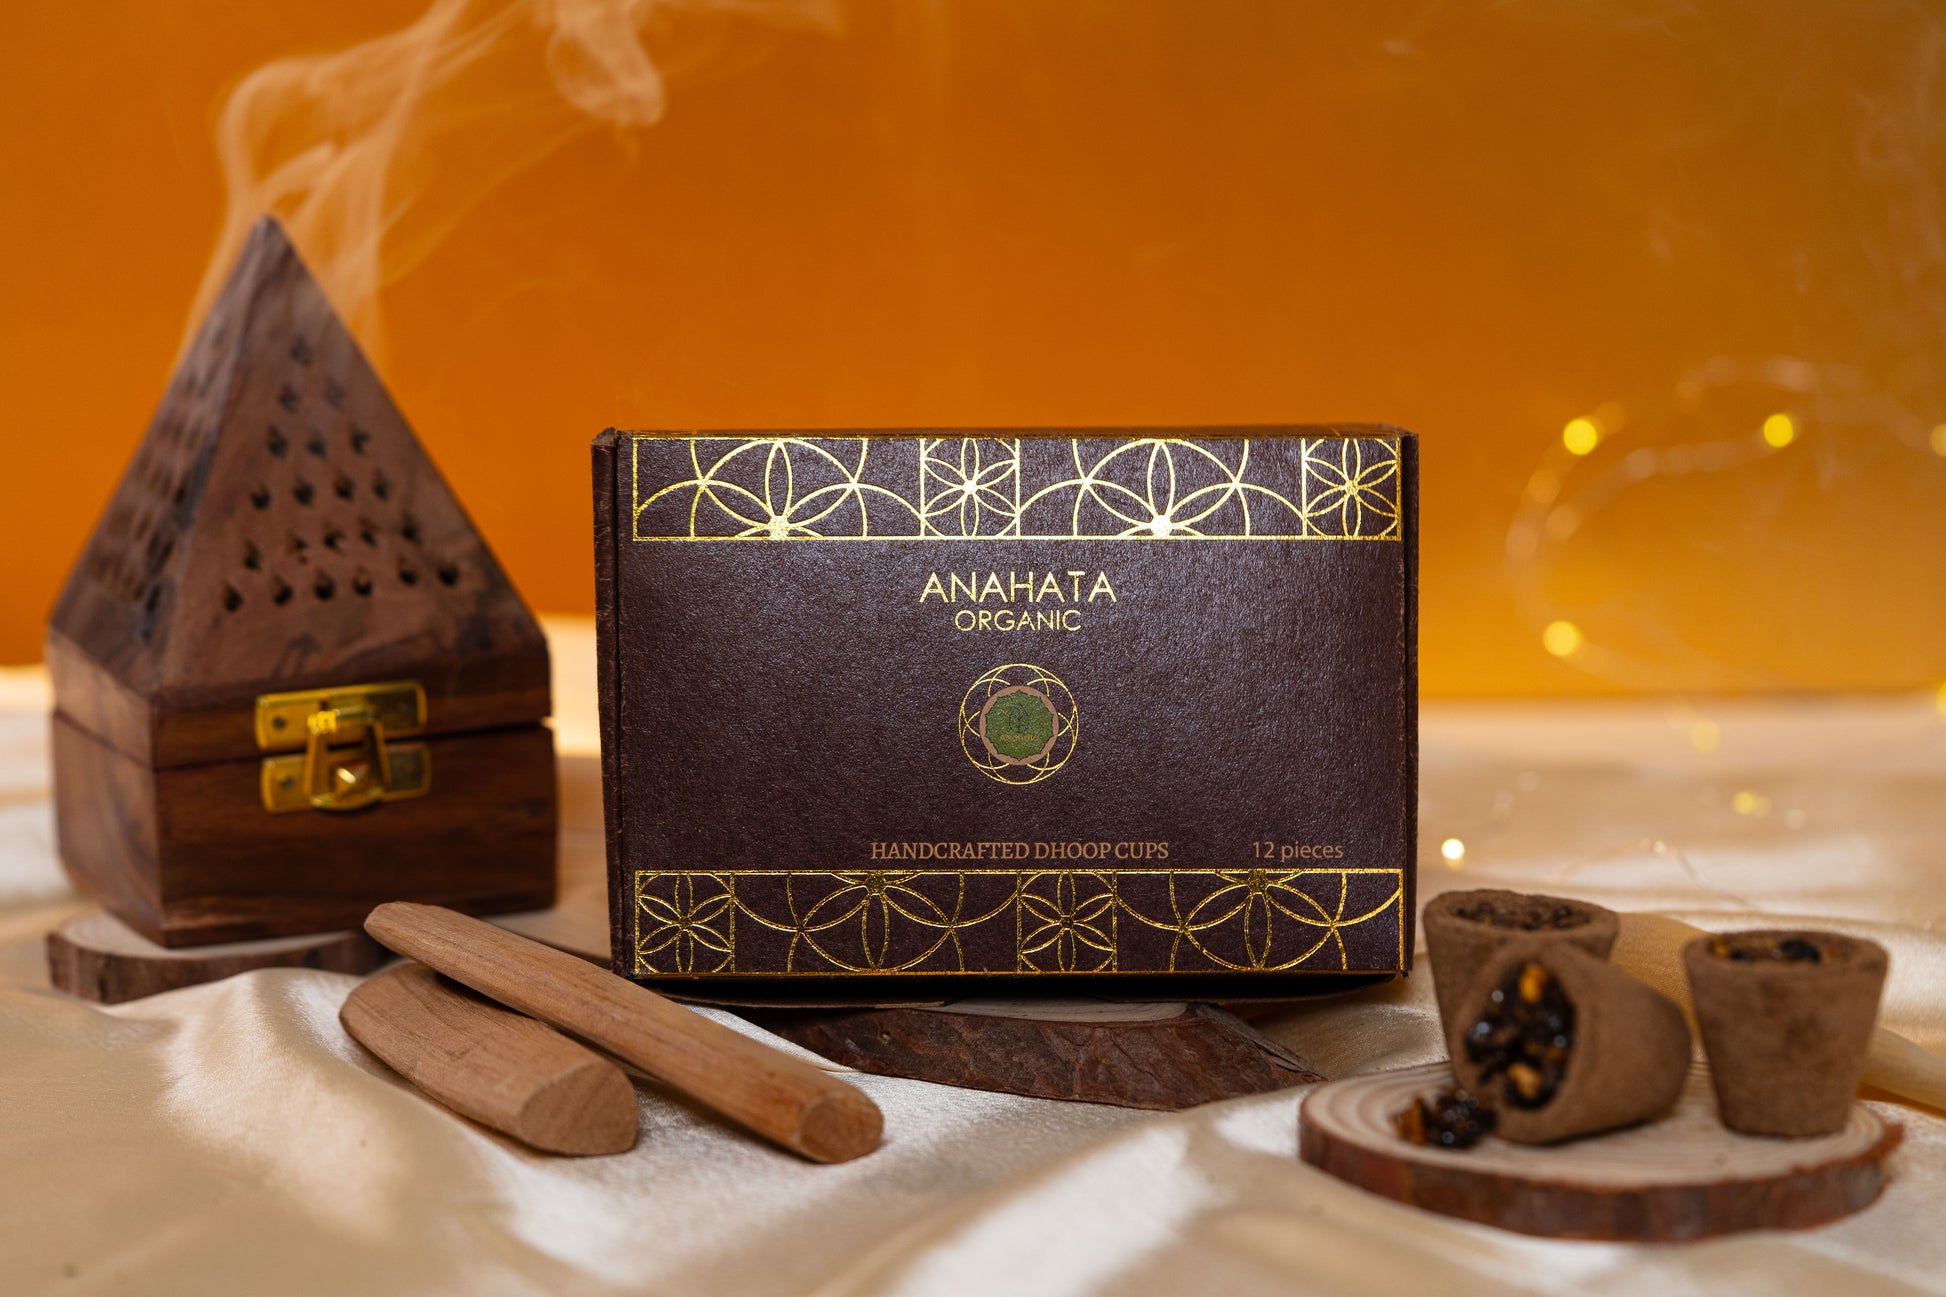 HANDCRAFTED DHOOP CUPS - Anahata Organic